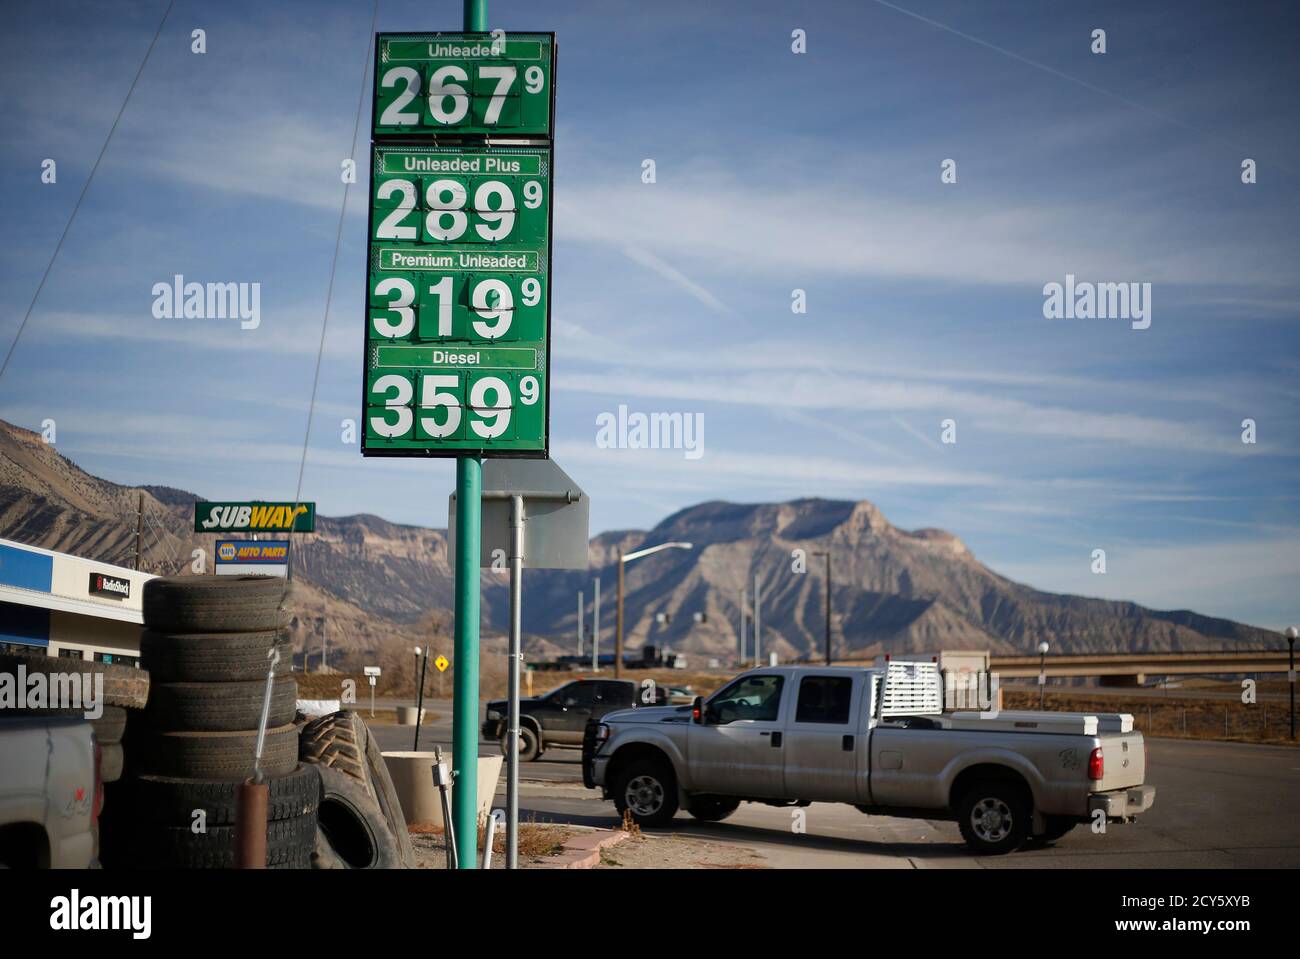 Gas prices in Parachute, Colorado, December 10, 2014. The economy of Parachute, with a current population of approximately 1000 people, was devastated when thousands of workers lost their jobs on 'Black Sunday' in 1982, after Exxon terminated the Colony Shale Oil Project. The current rise of hydraulic fracking in natural gas retrieval has given a cautious hope to the town's inhabitants, who know that market demand brings both boom and bust. Picture taken December 10, 2014.     REUTERS/Jim Urquhart (UNITED STATES  - Tags: ENERGY BUSINESS) Stock Photo